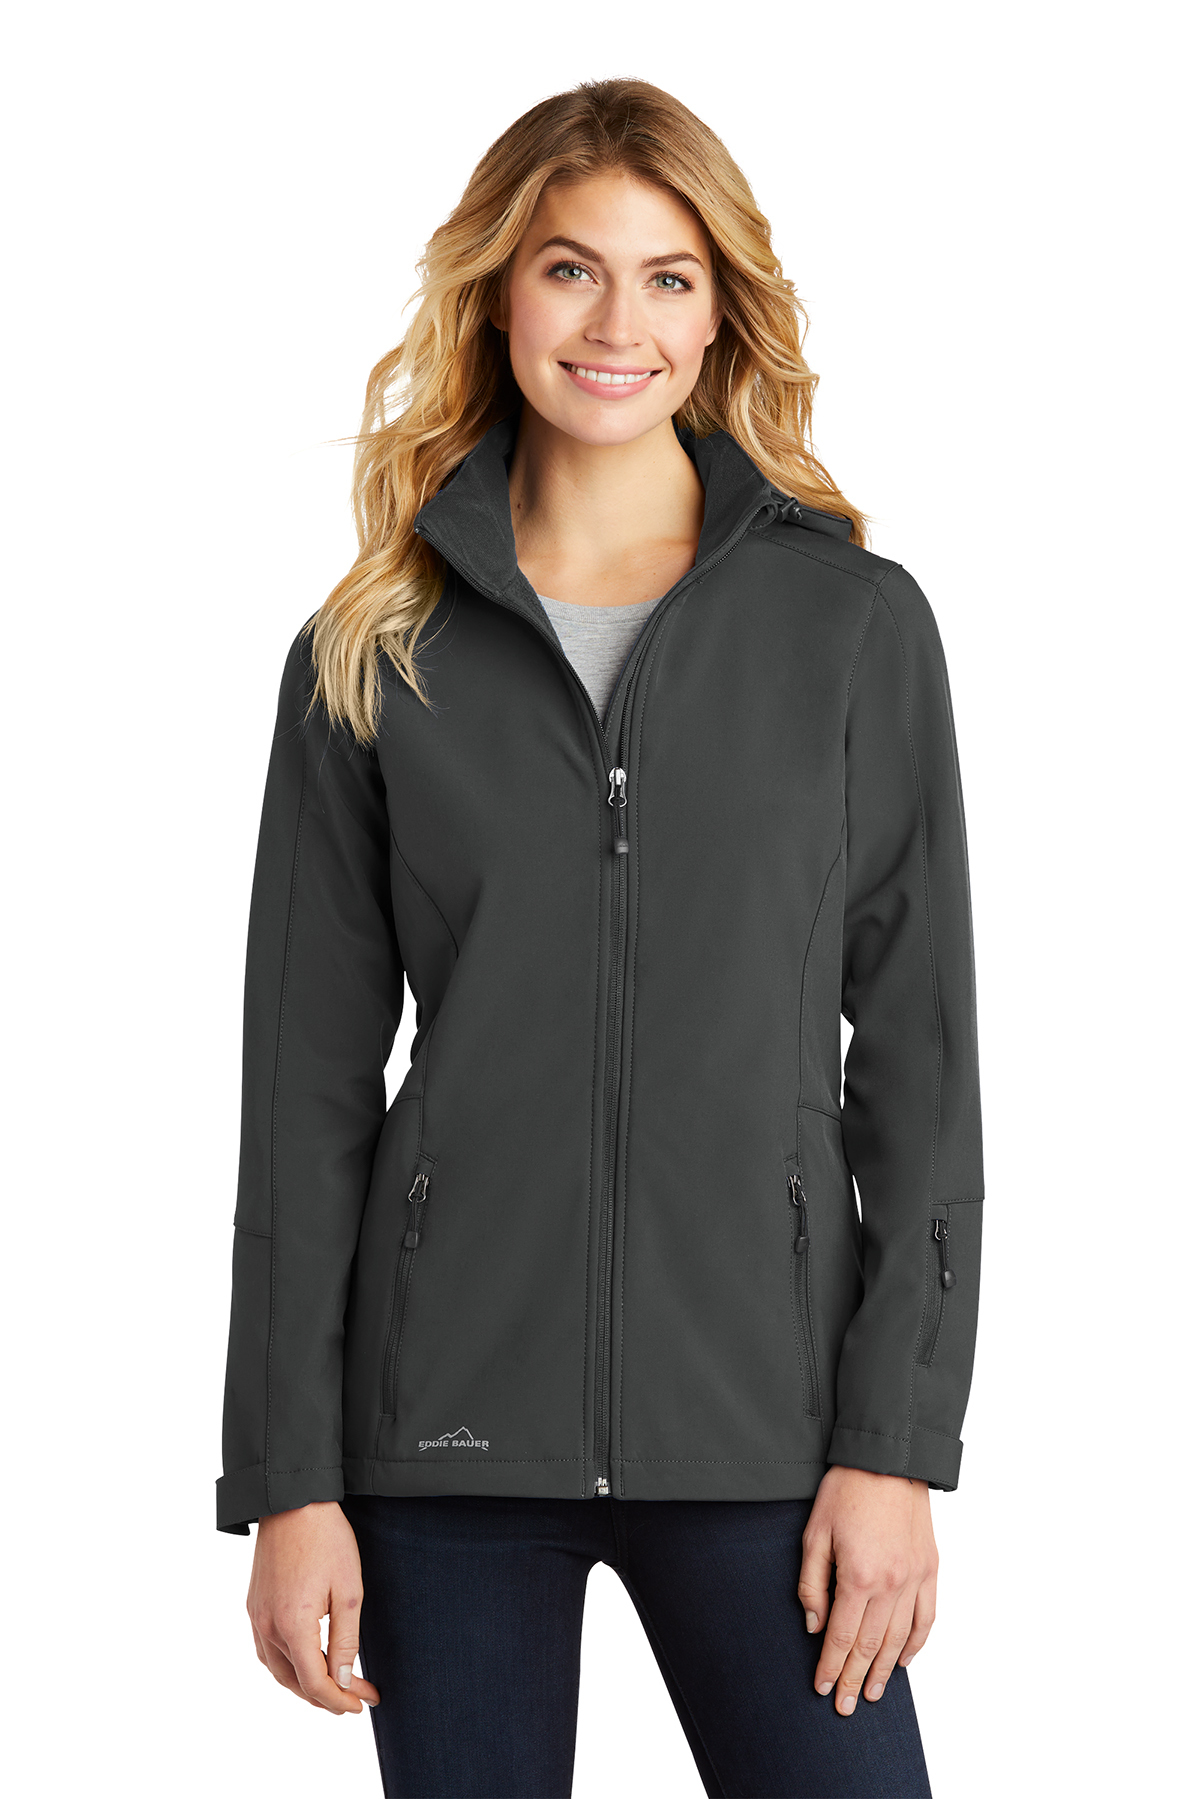 Eddie Bauer Ladies Hooded Soft Shell Parka | Product | Company Casuals